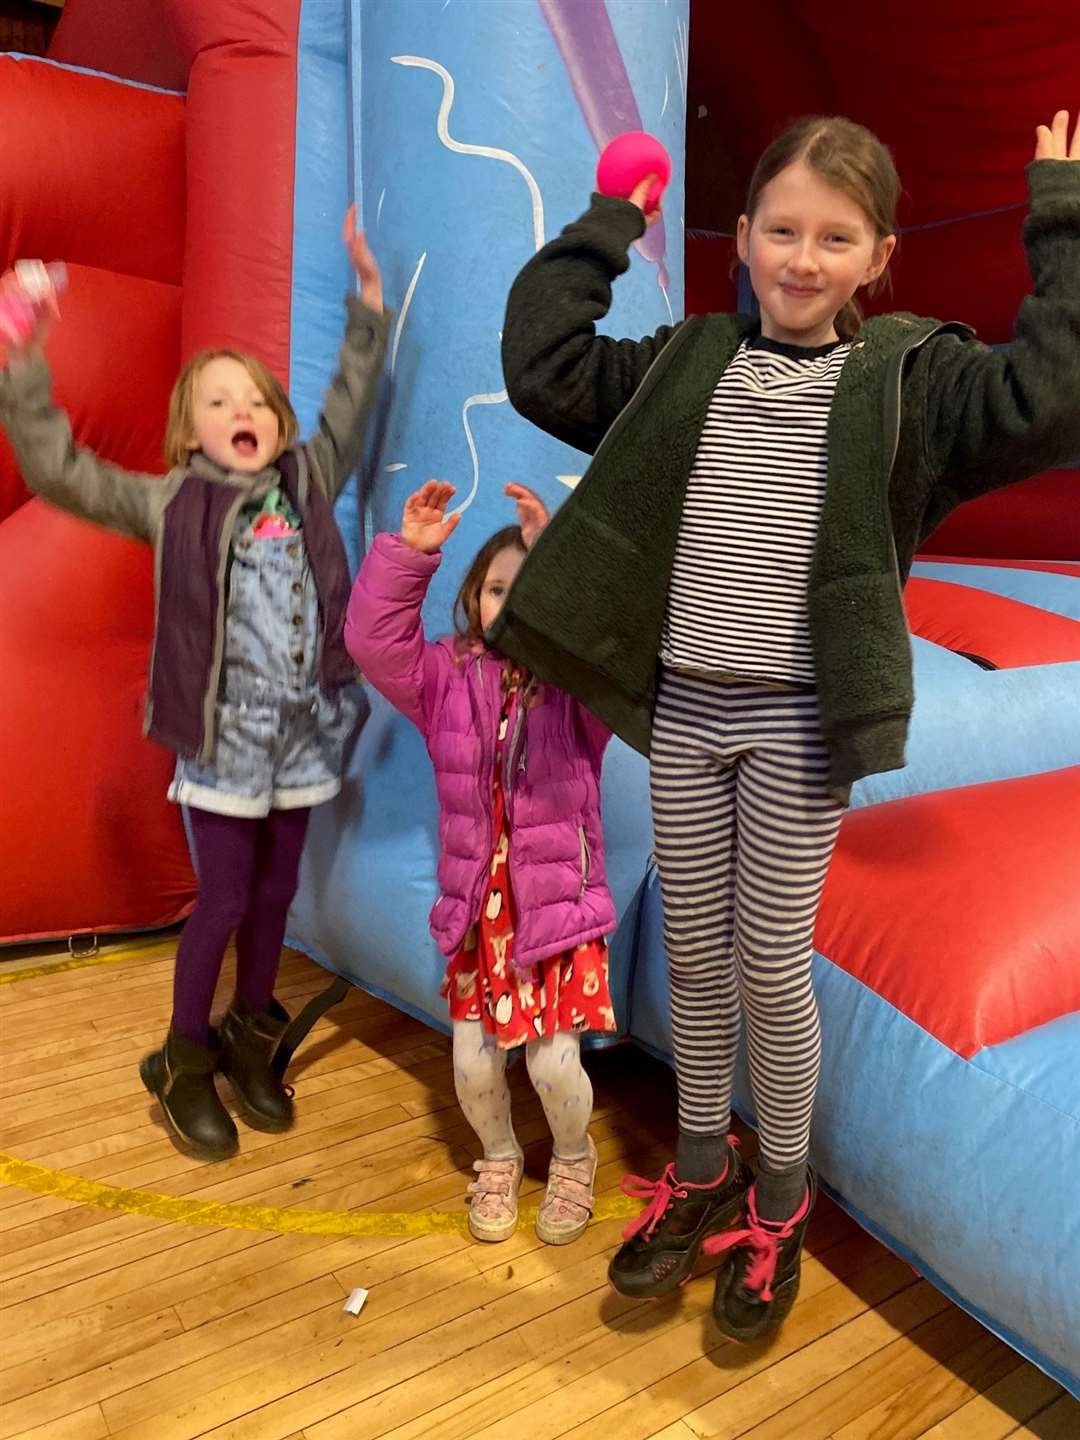 Robyn, Sadie and Edie Vaughan, from Lairg, enjoyed the bouncy castle run by Lairg Primary School Council to raise funds for the school.